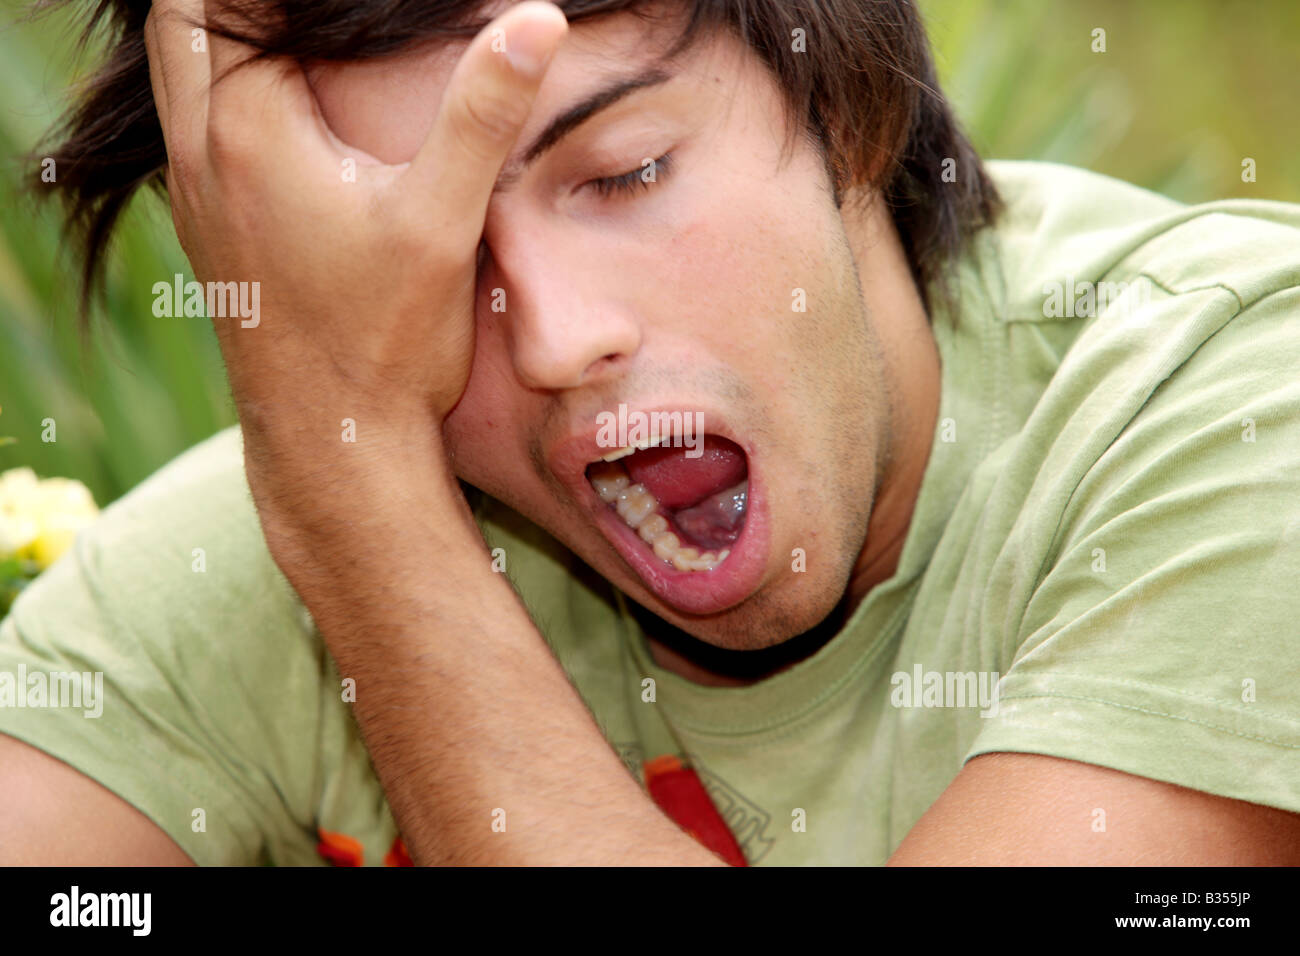 Young Man Yawning Model Released Stock Photo